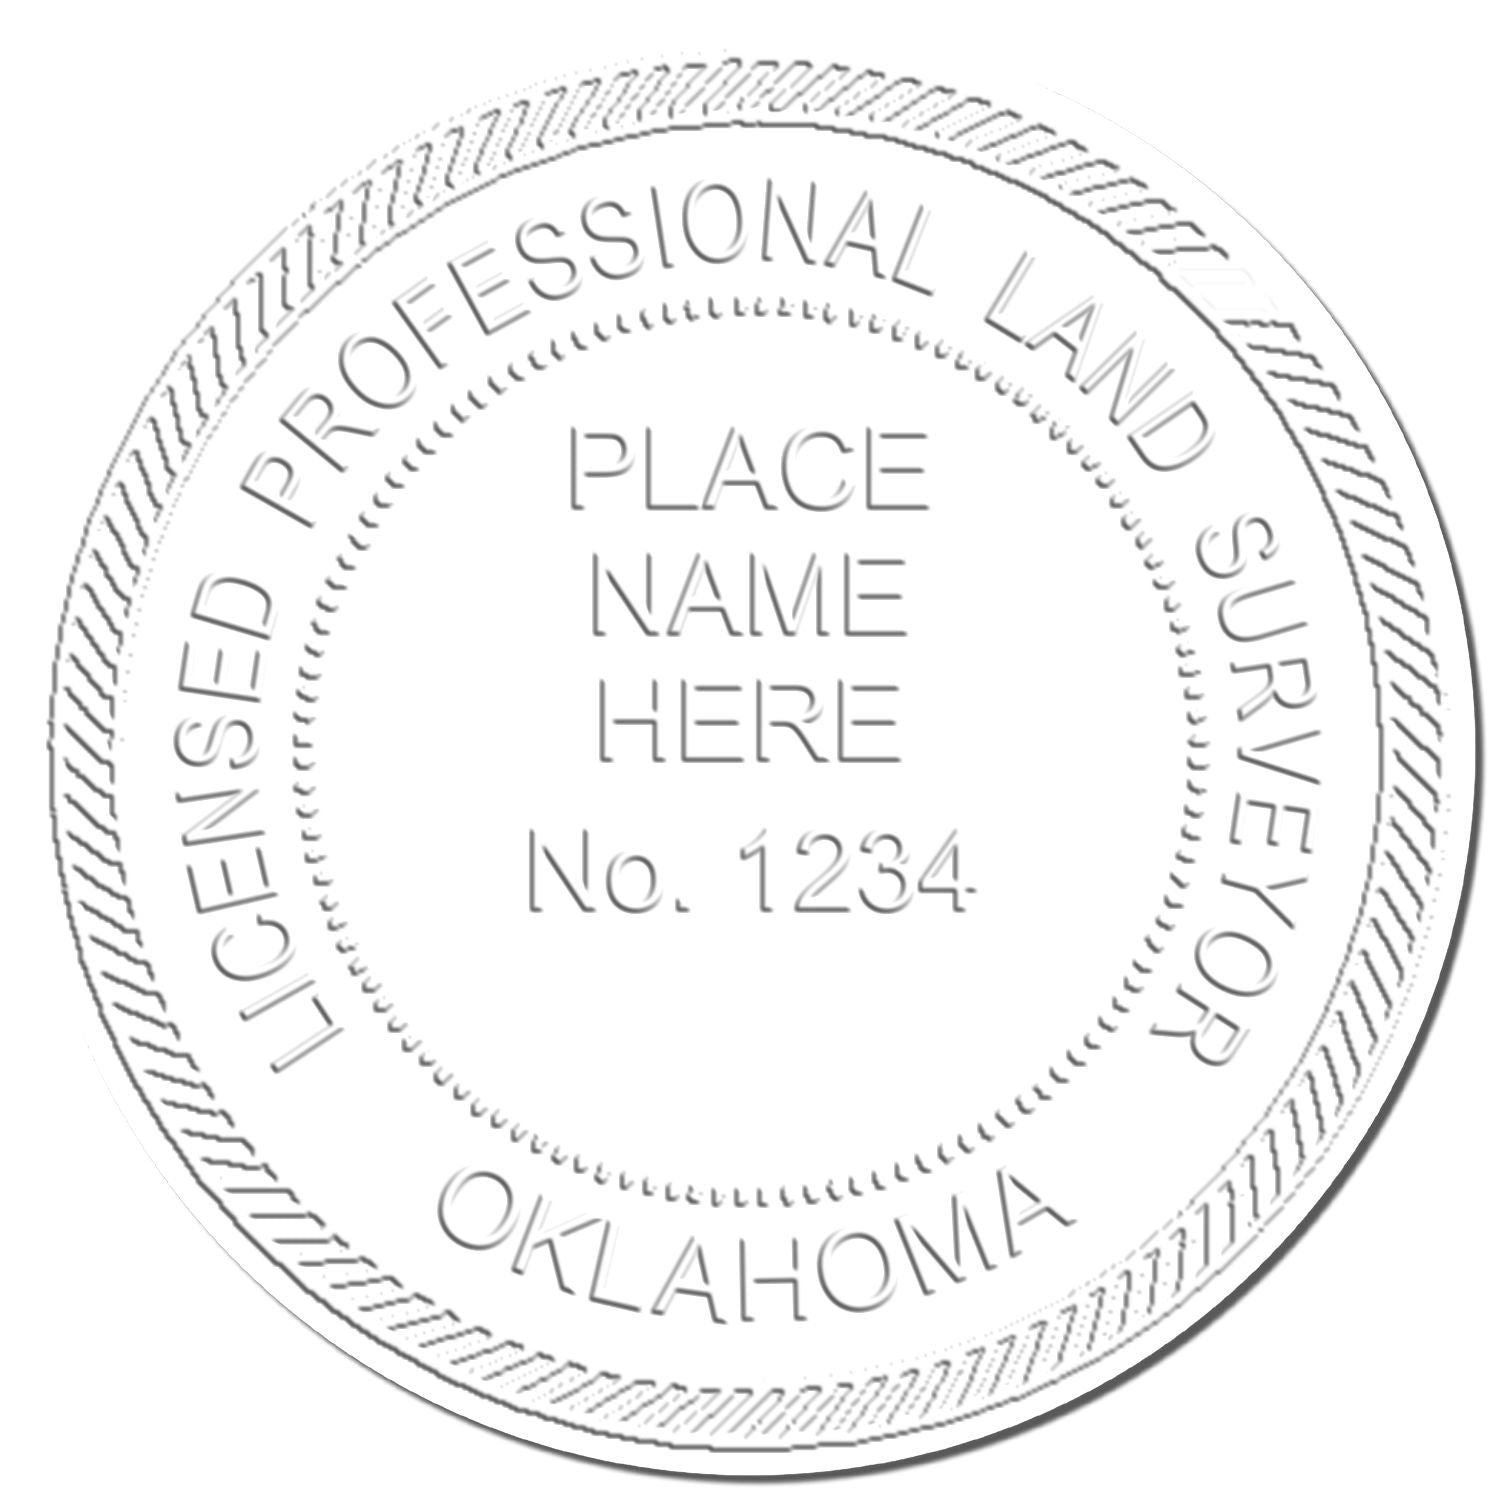 This paper is stamped with a sample imprint of the Heavy Duty Cast Iron Oklahoma Land Surveyor Seal Embosser, signifying its quality and reliability.